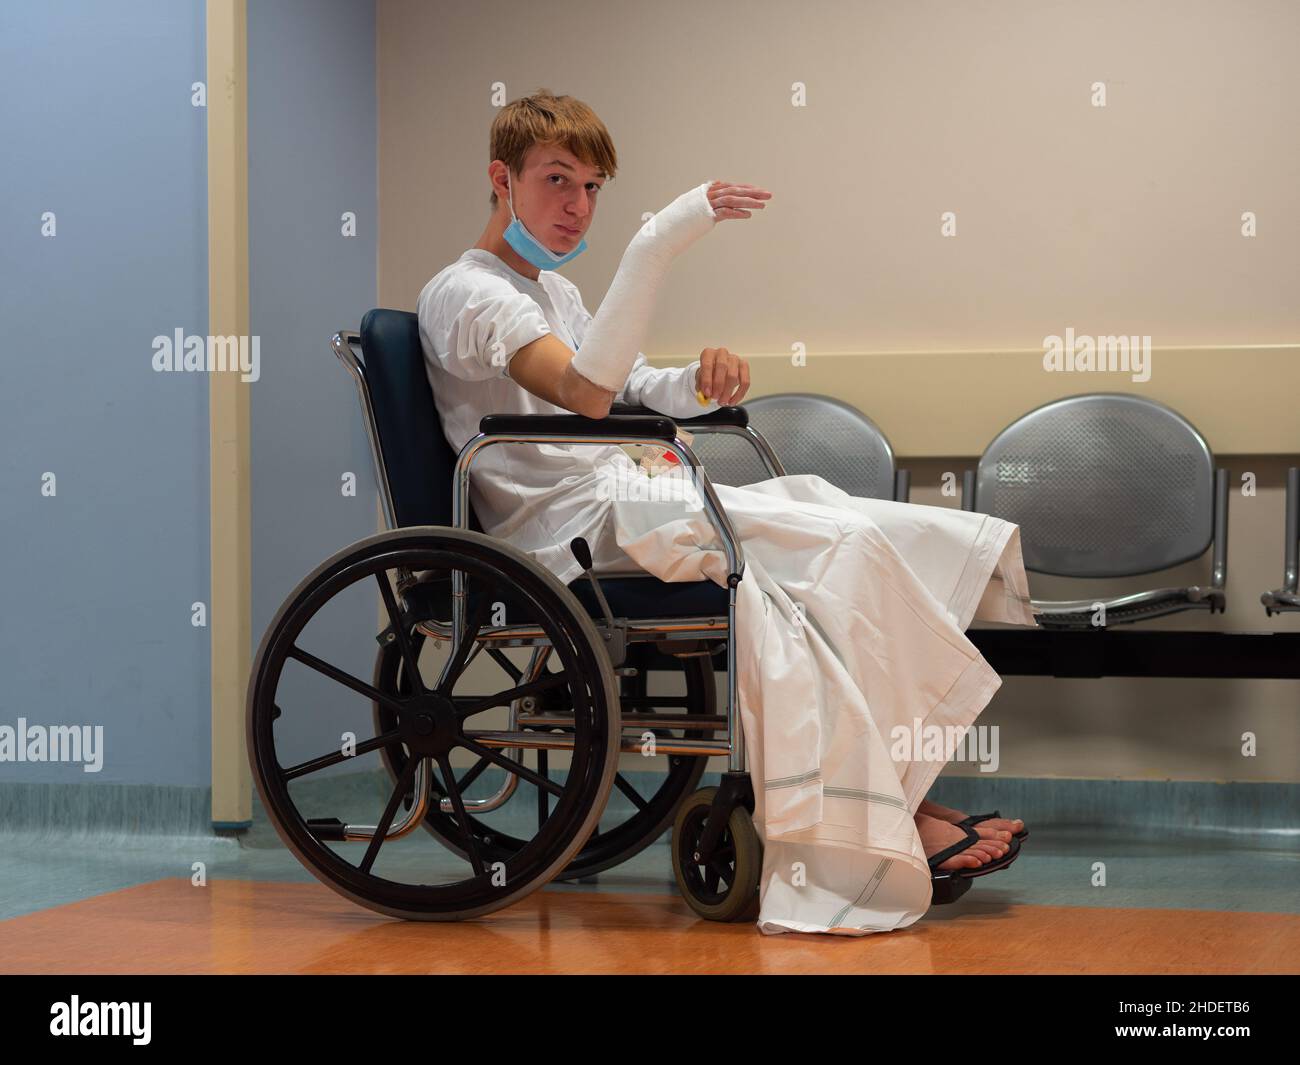 Teenage Boy Sitting in Wheelchair in Hospital with Arm and Wrist in Cast Shortly after Injury. Stock Photo